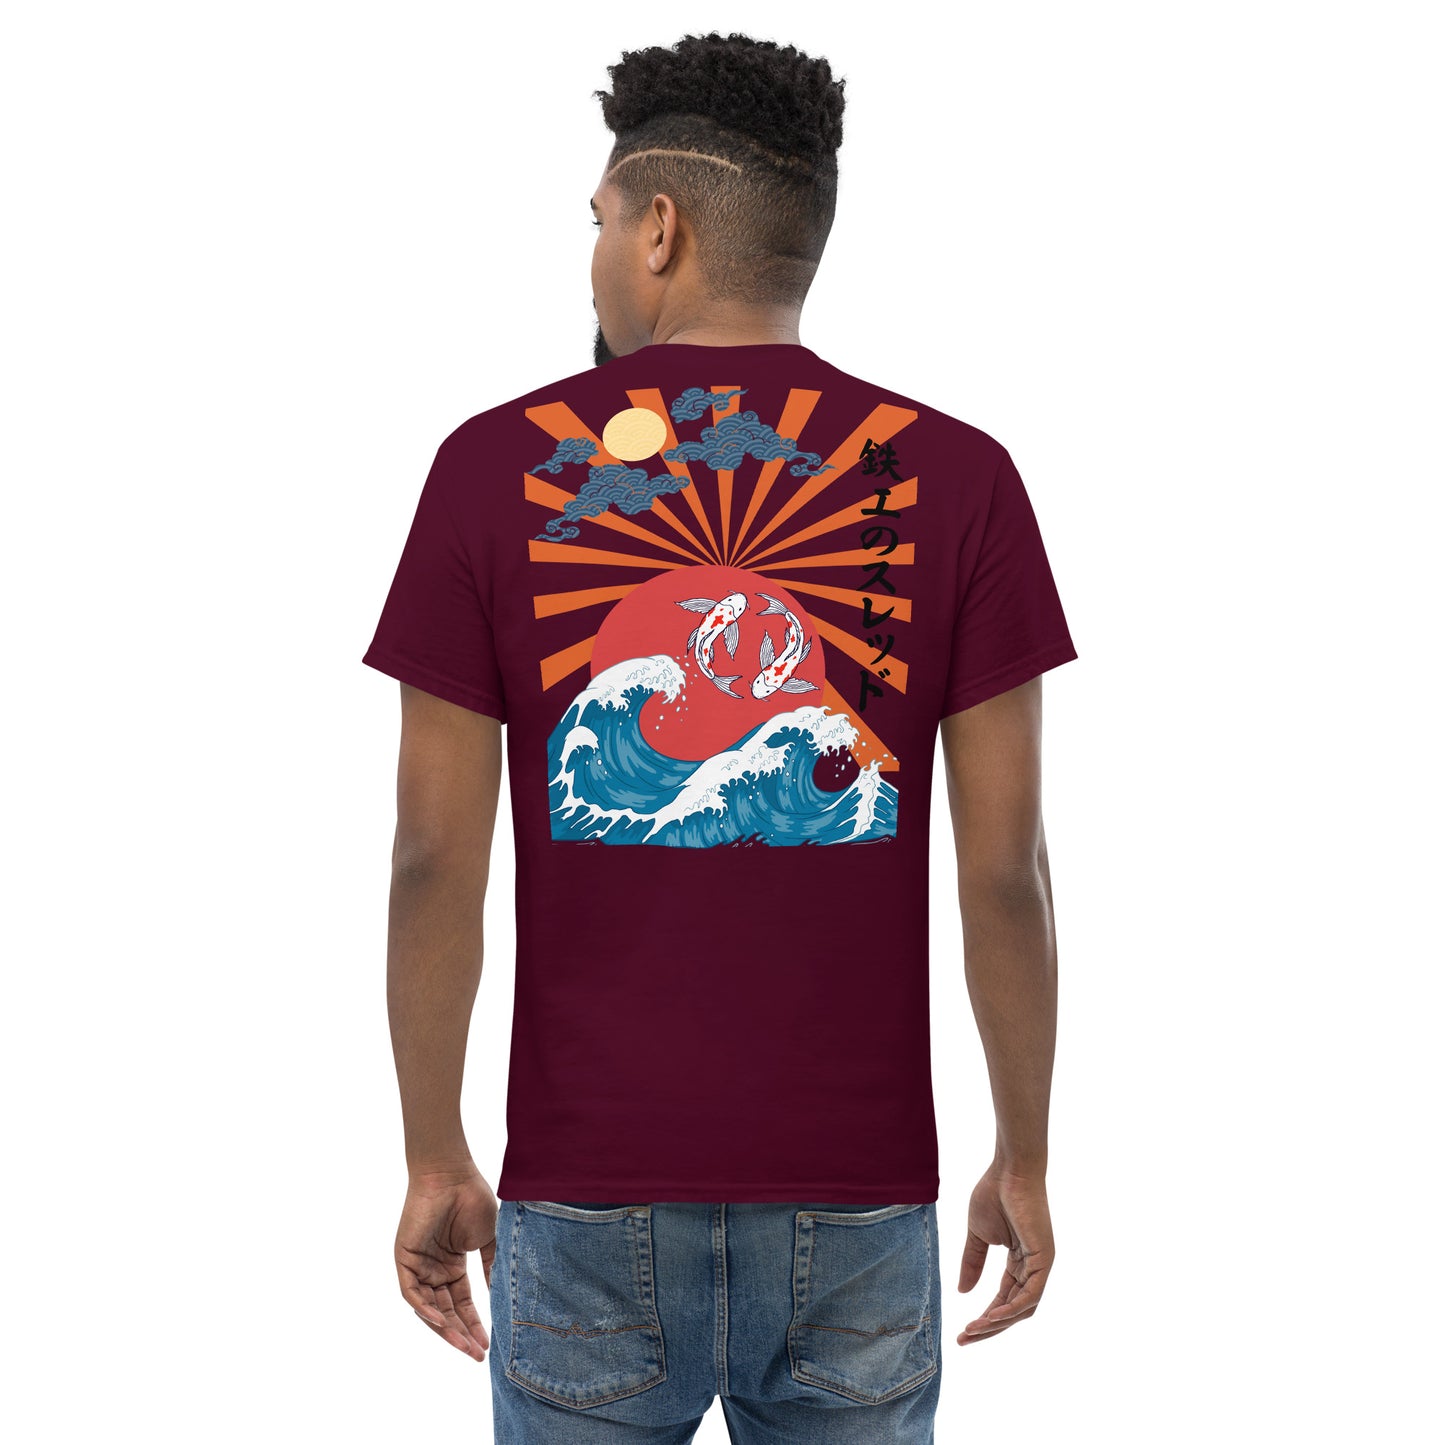 The Great Wave T-shirt